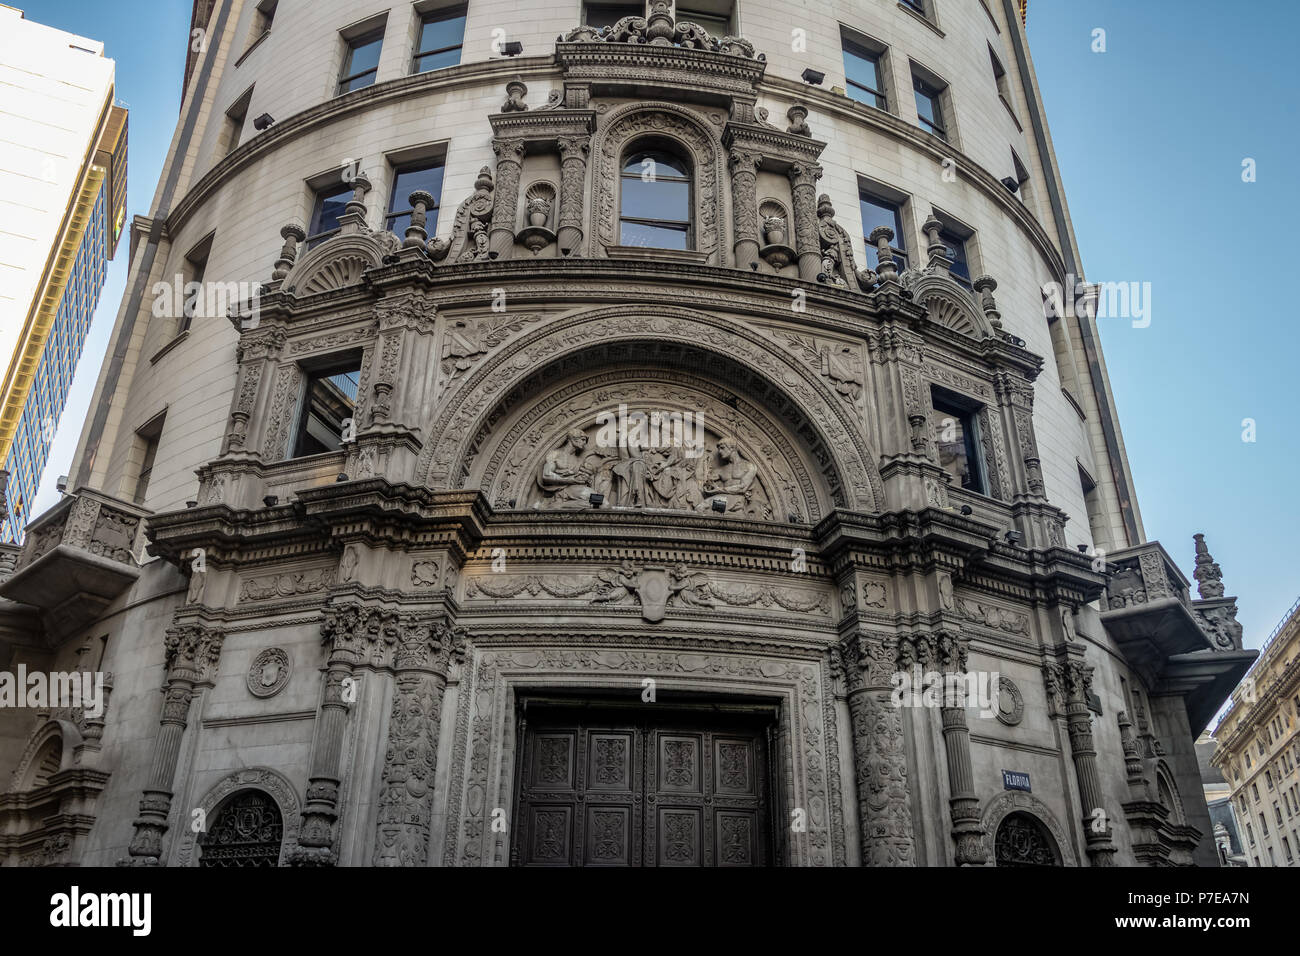 ICBC former First National Bank of Boston Building Facade in Calle Florida - Buenos Aires, Argentina Stock Photo